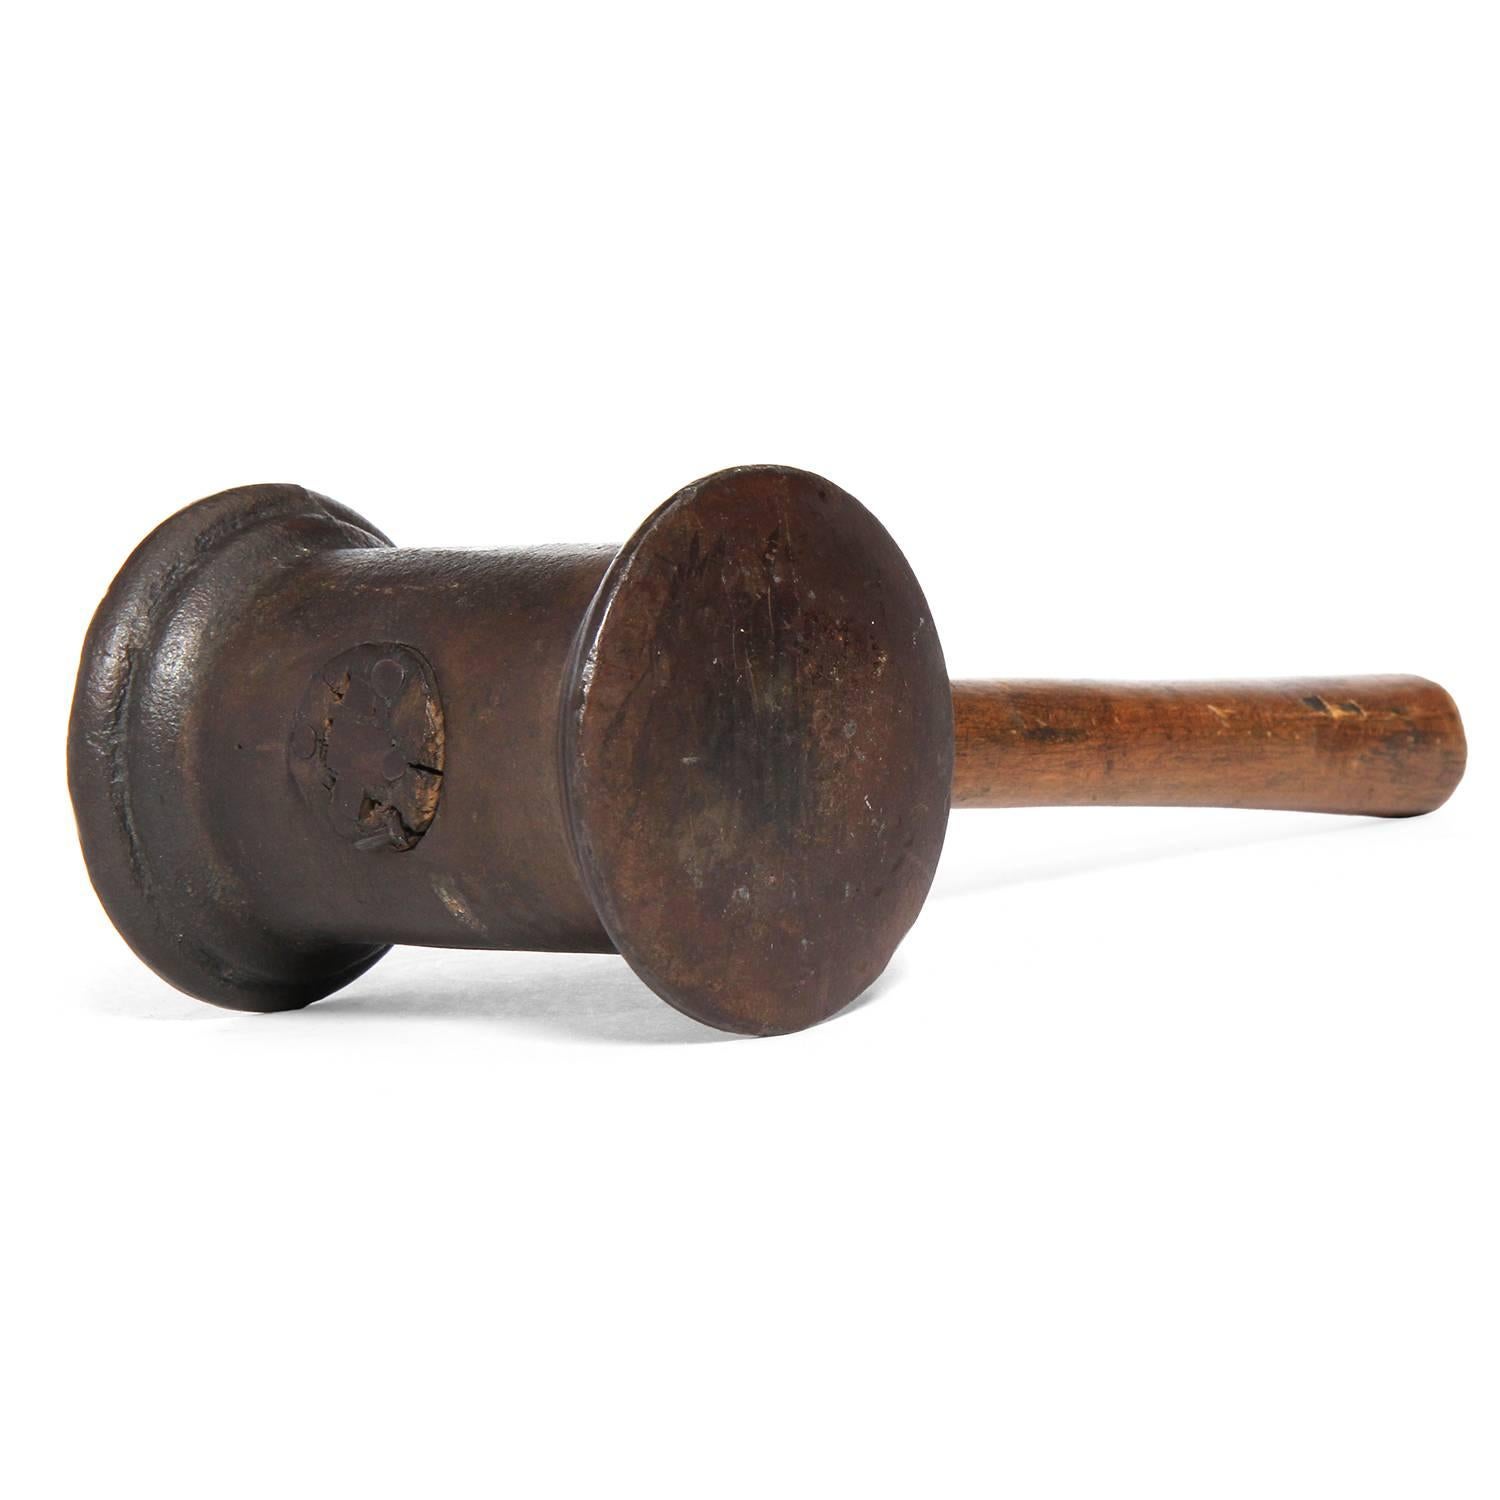 A fine and unusual hammer used to pulverize gold into leaf, having a warmly toned oak handle attached to patinated steel head.